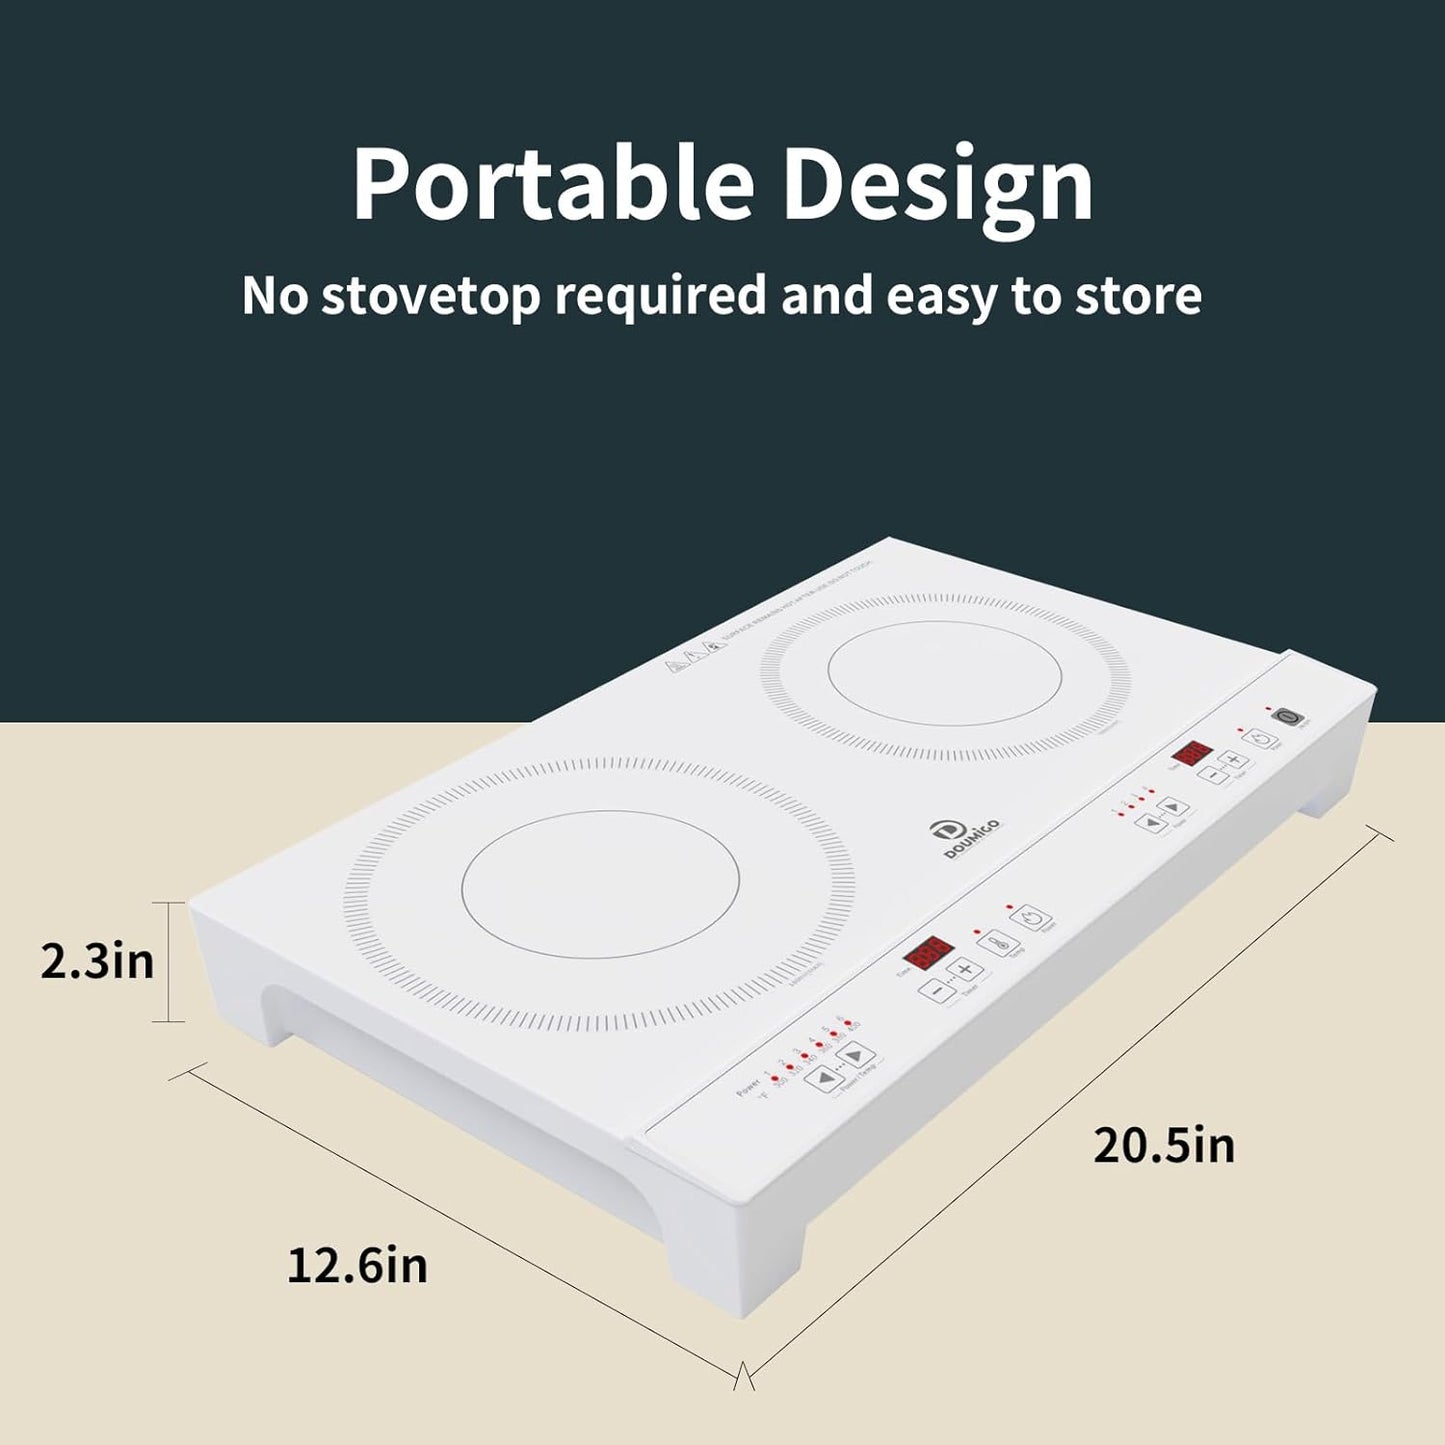 Doumigo Double Induction Cooktop, Portable Electric Stove with 2 Burners, 120V, 1800W, 12 Inches, Temperature Control, Kid Safety Lock, Timer